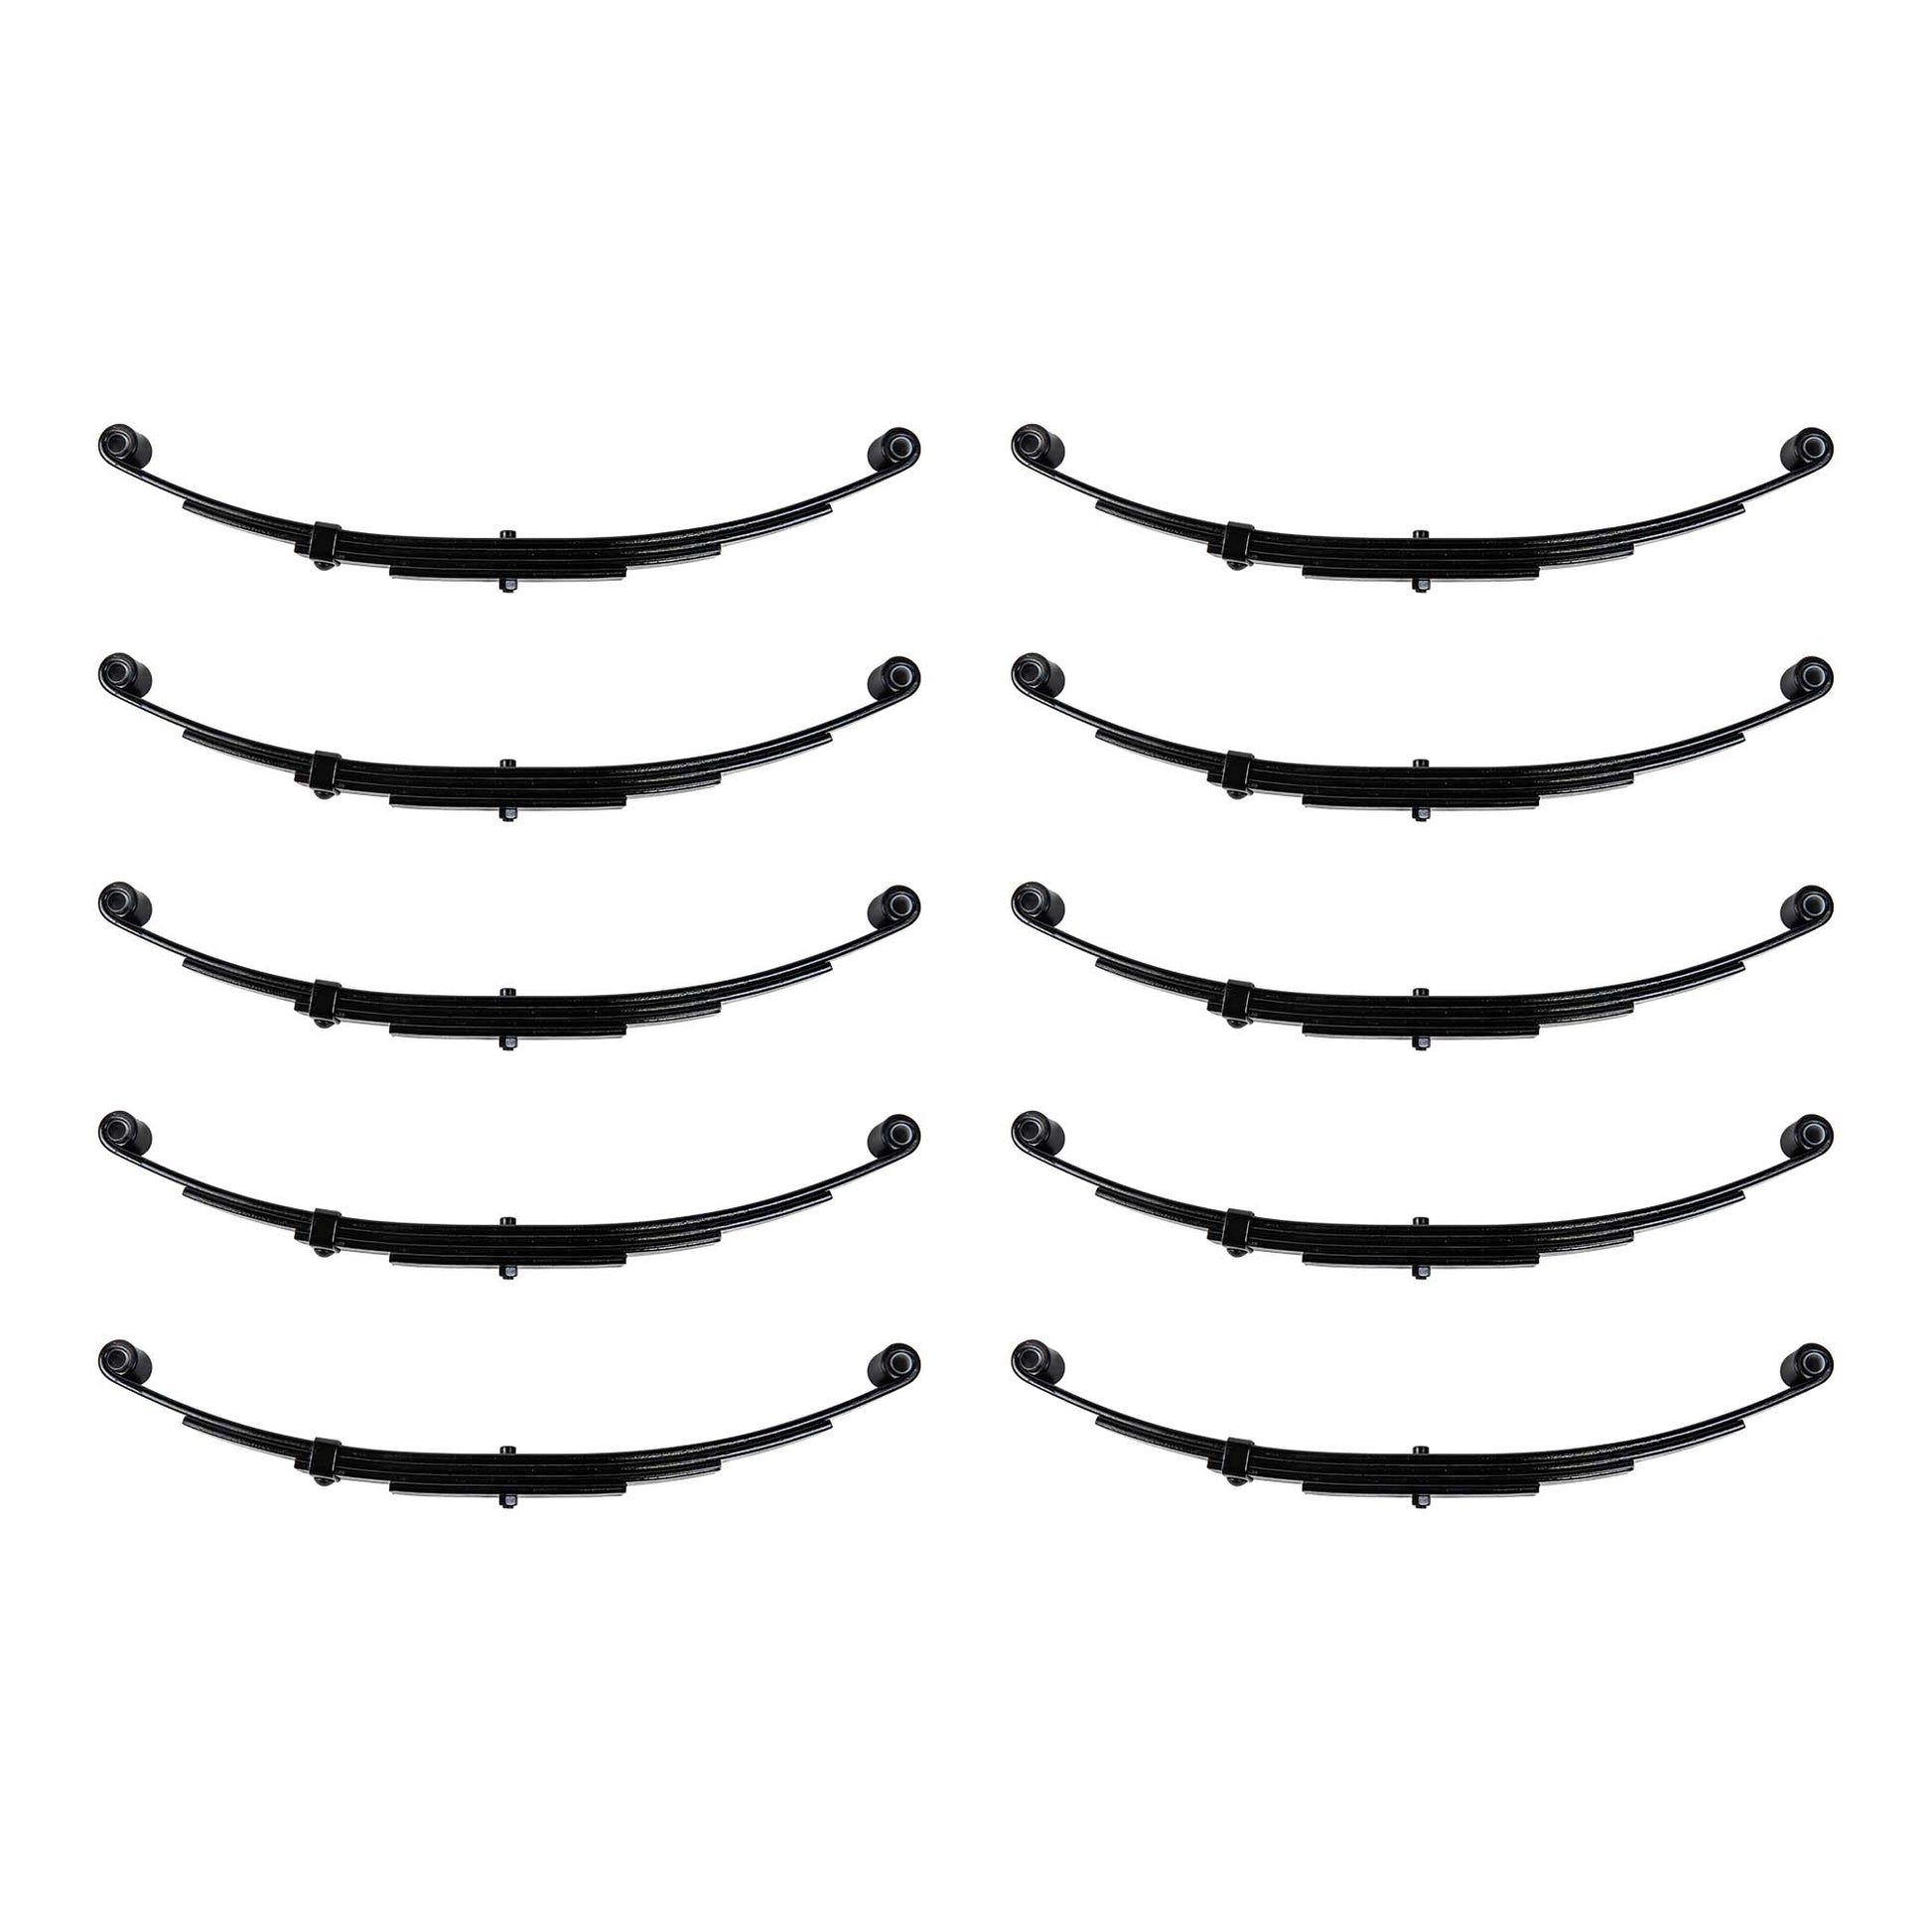 4 Leaf 25 1/4"x 1 3/4" Trailer Double  -Eye Spring for 3500 lb Axles - Pack of 10